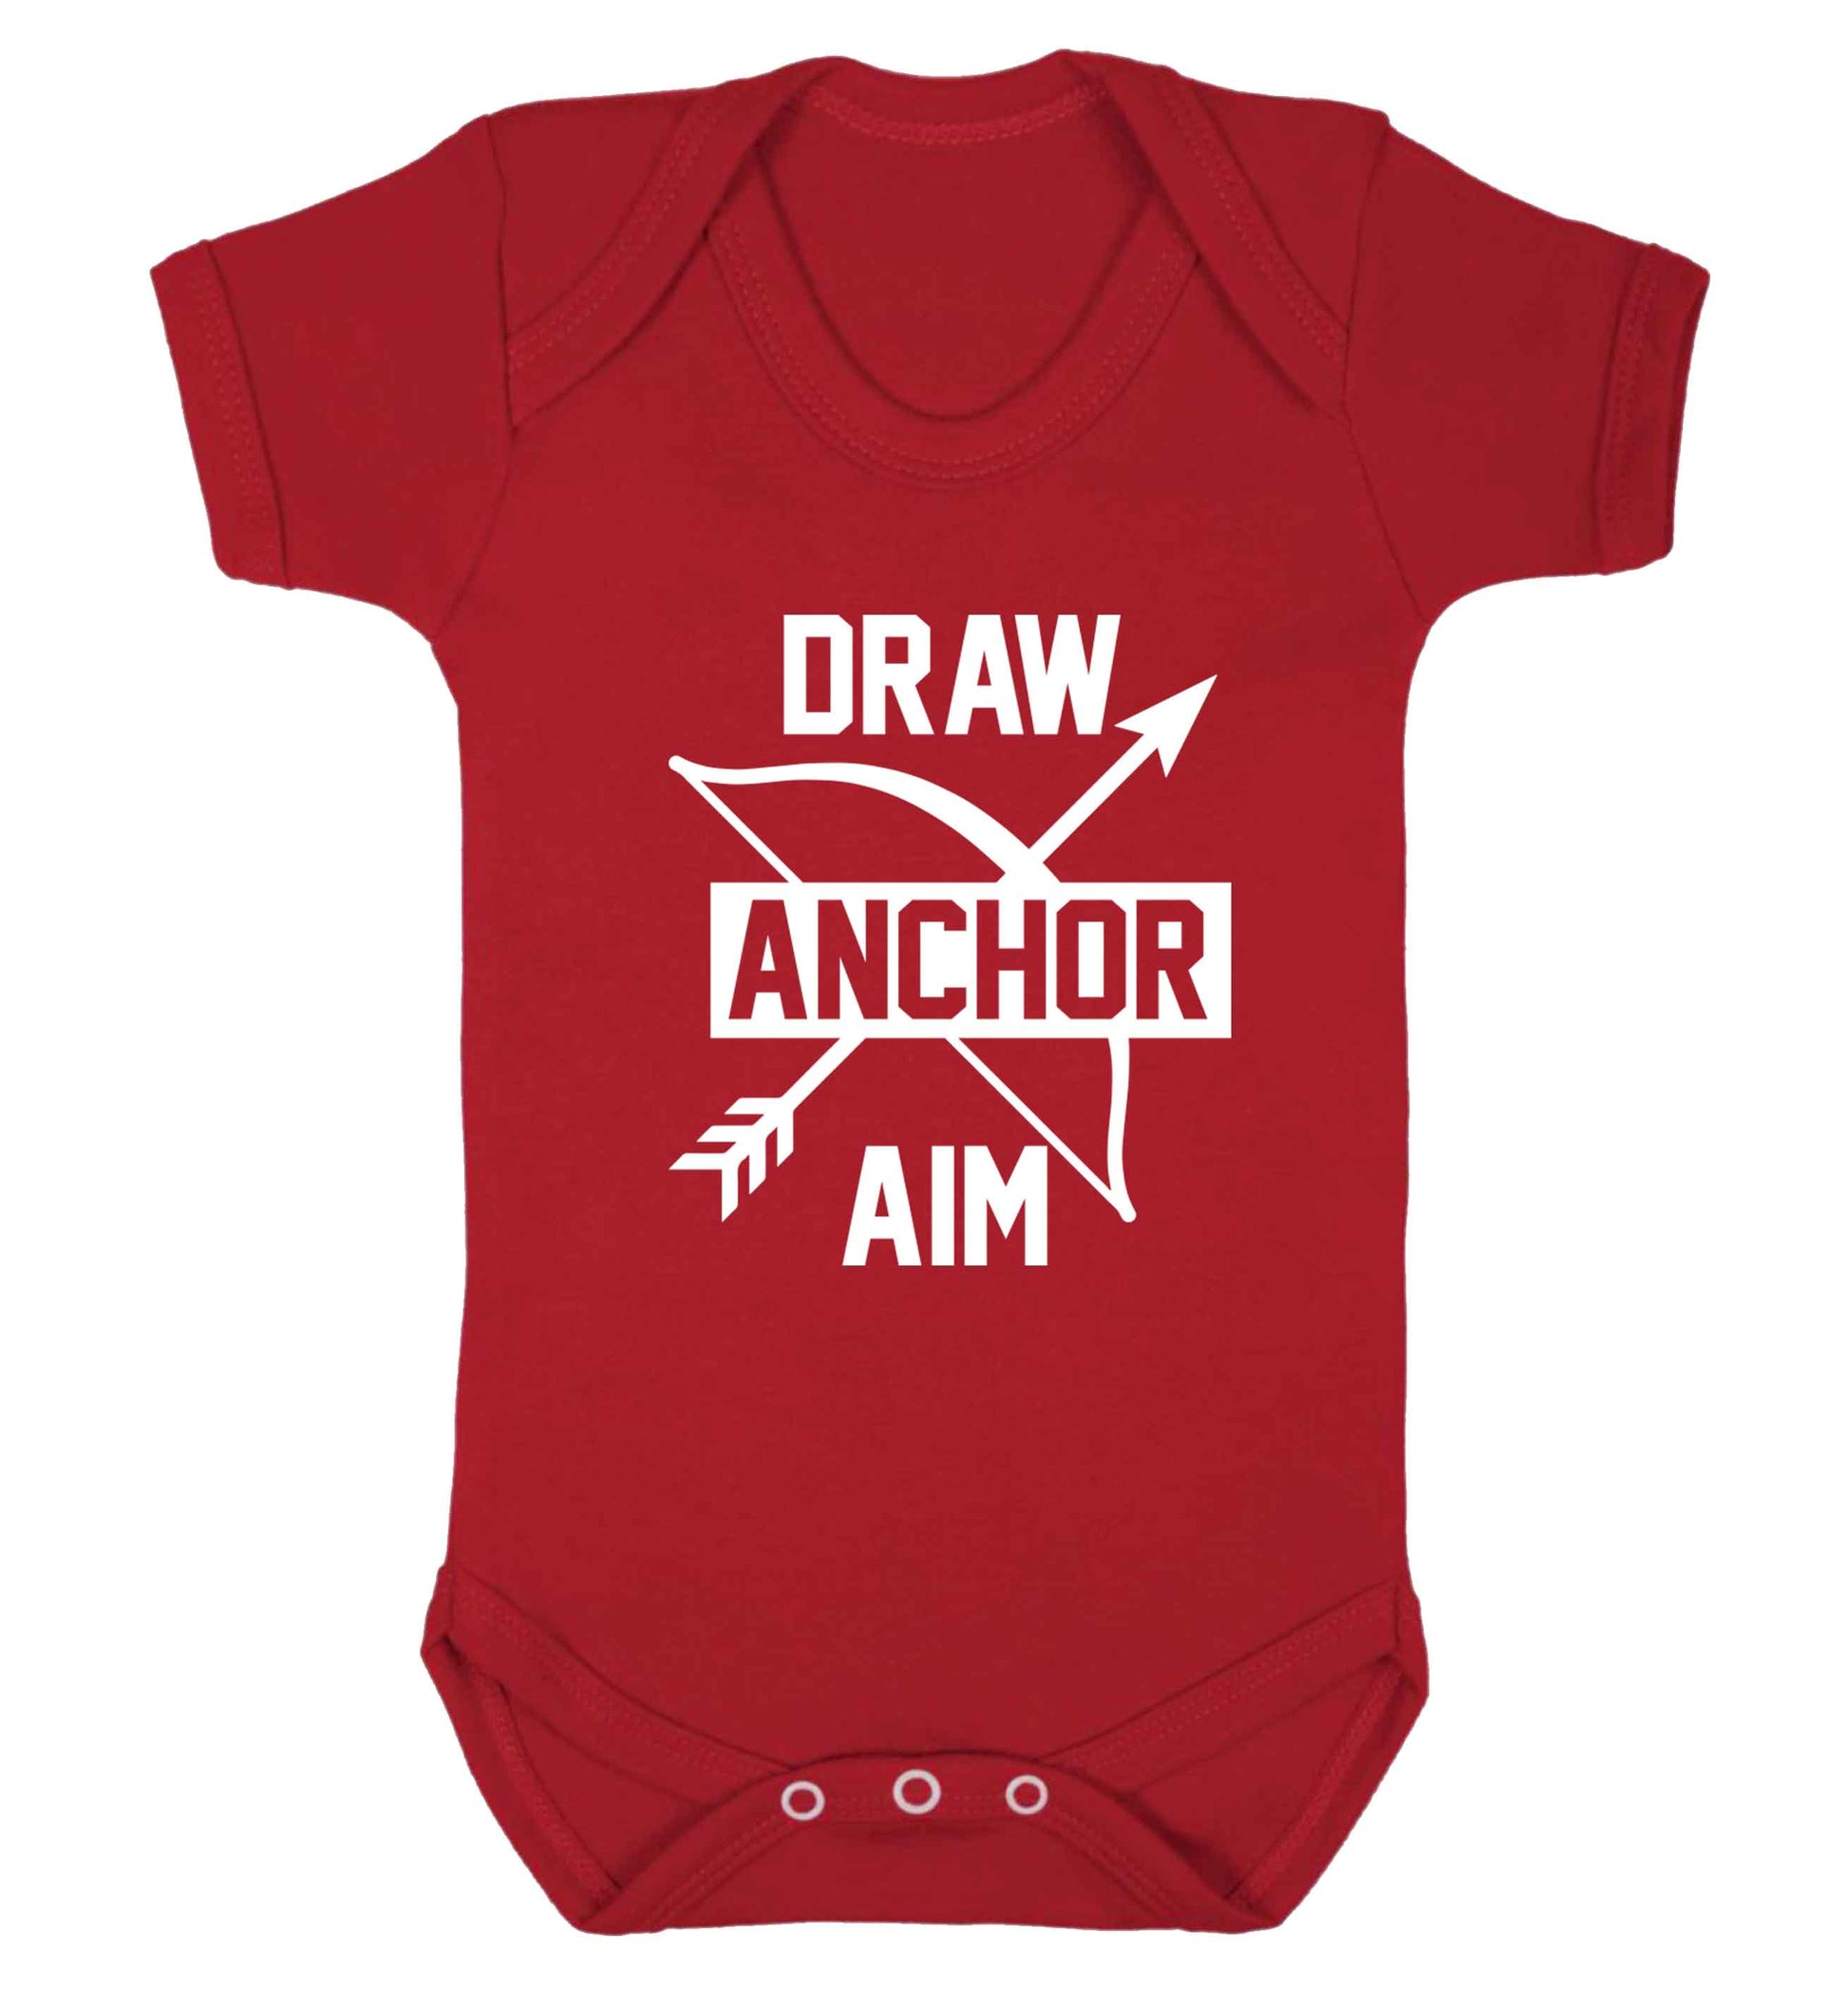 Draw anchor aim Baby Vest red 18-24 months